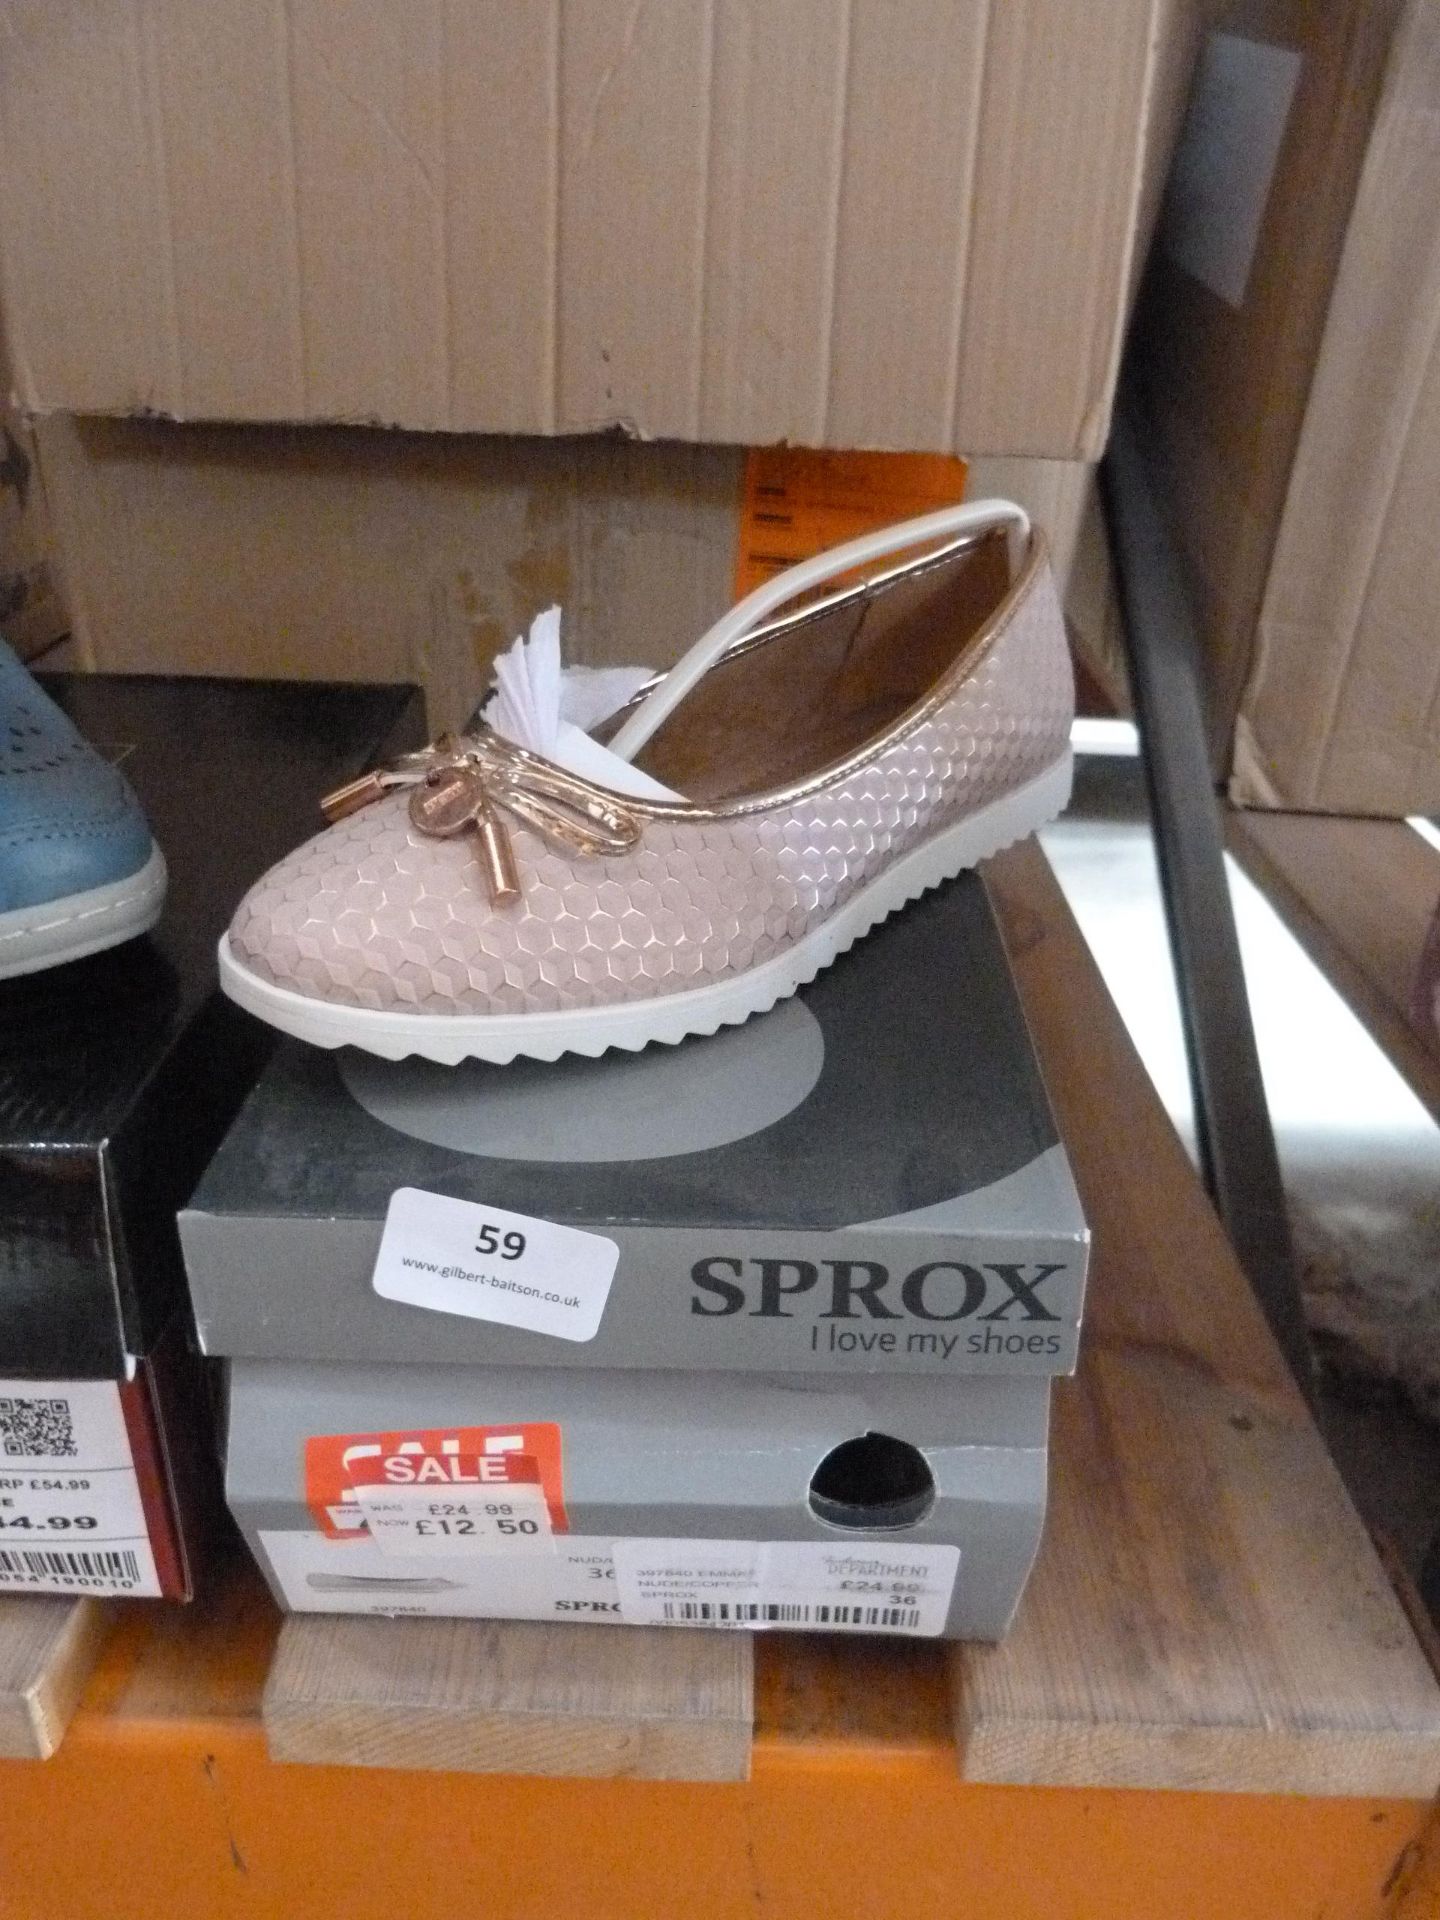 *Sprox Ladies Shoes Size: 36